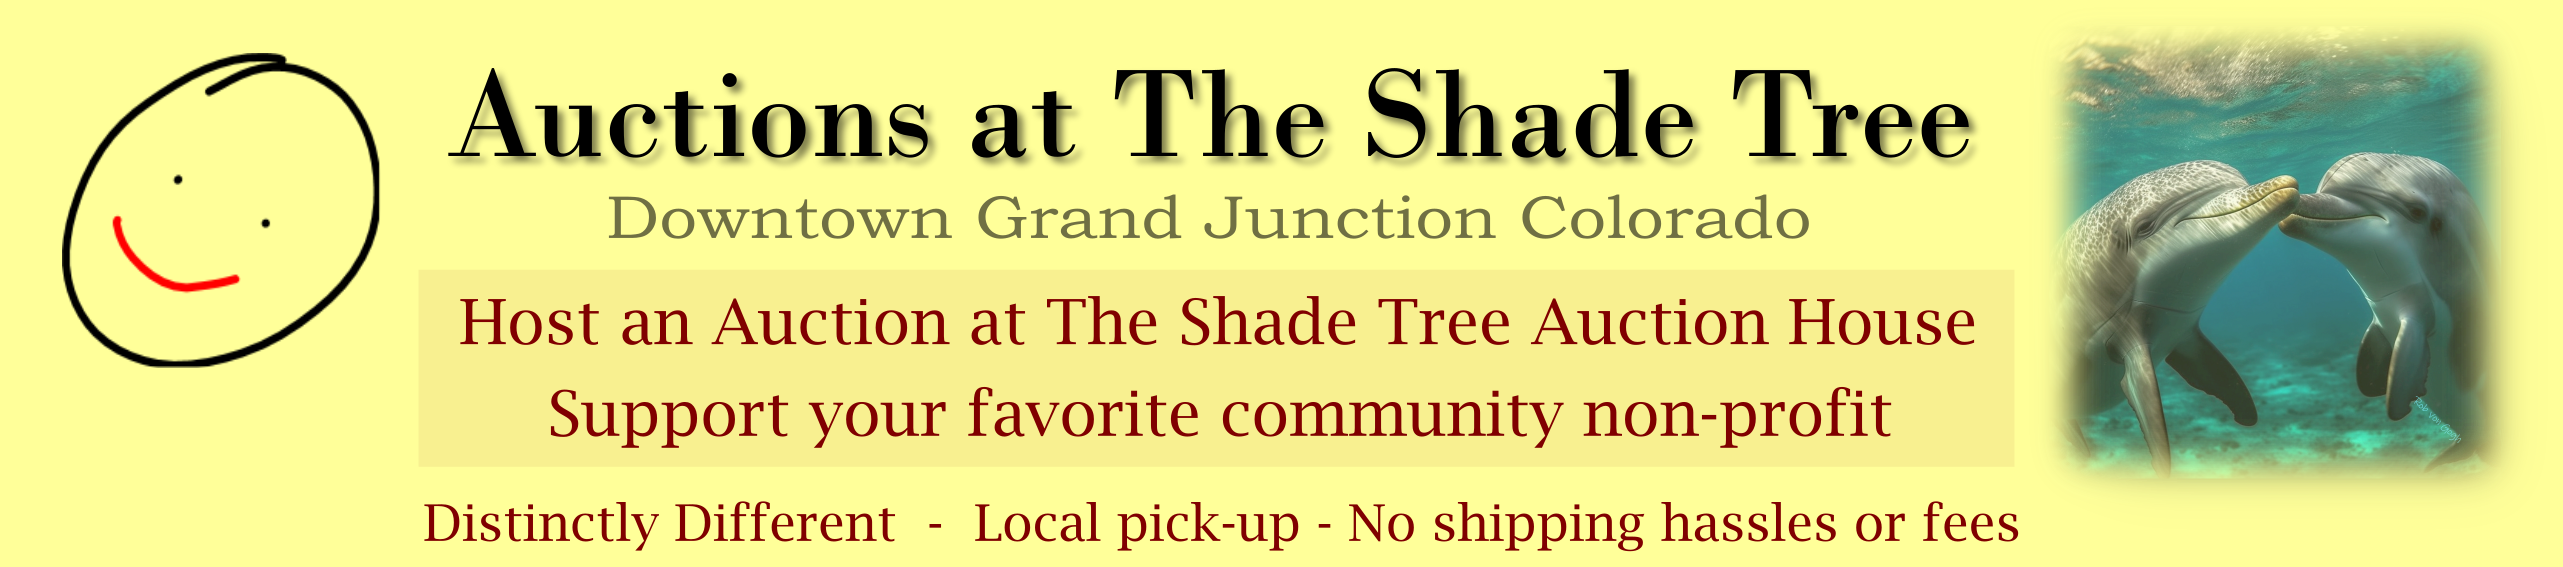 Auctions at The Shade Tree